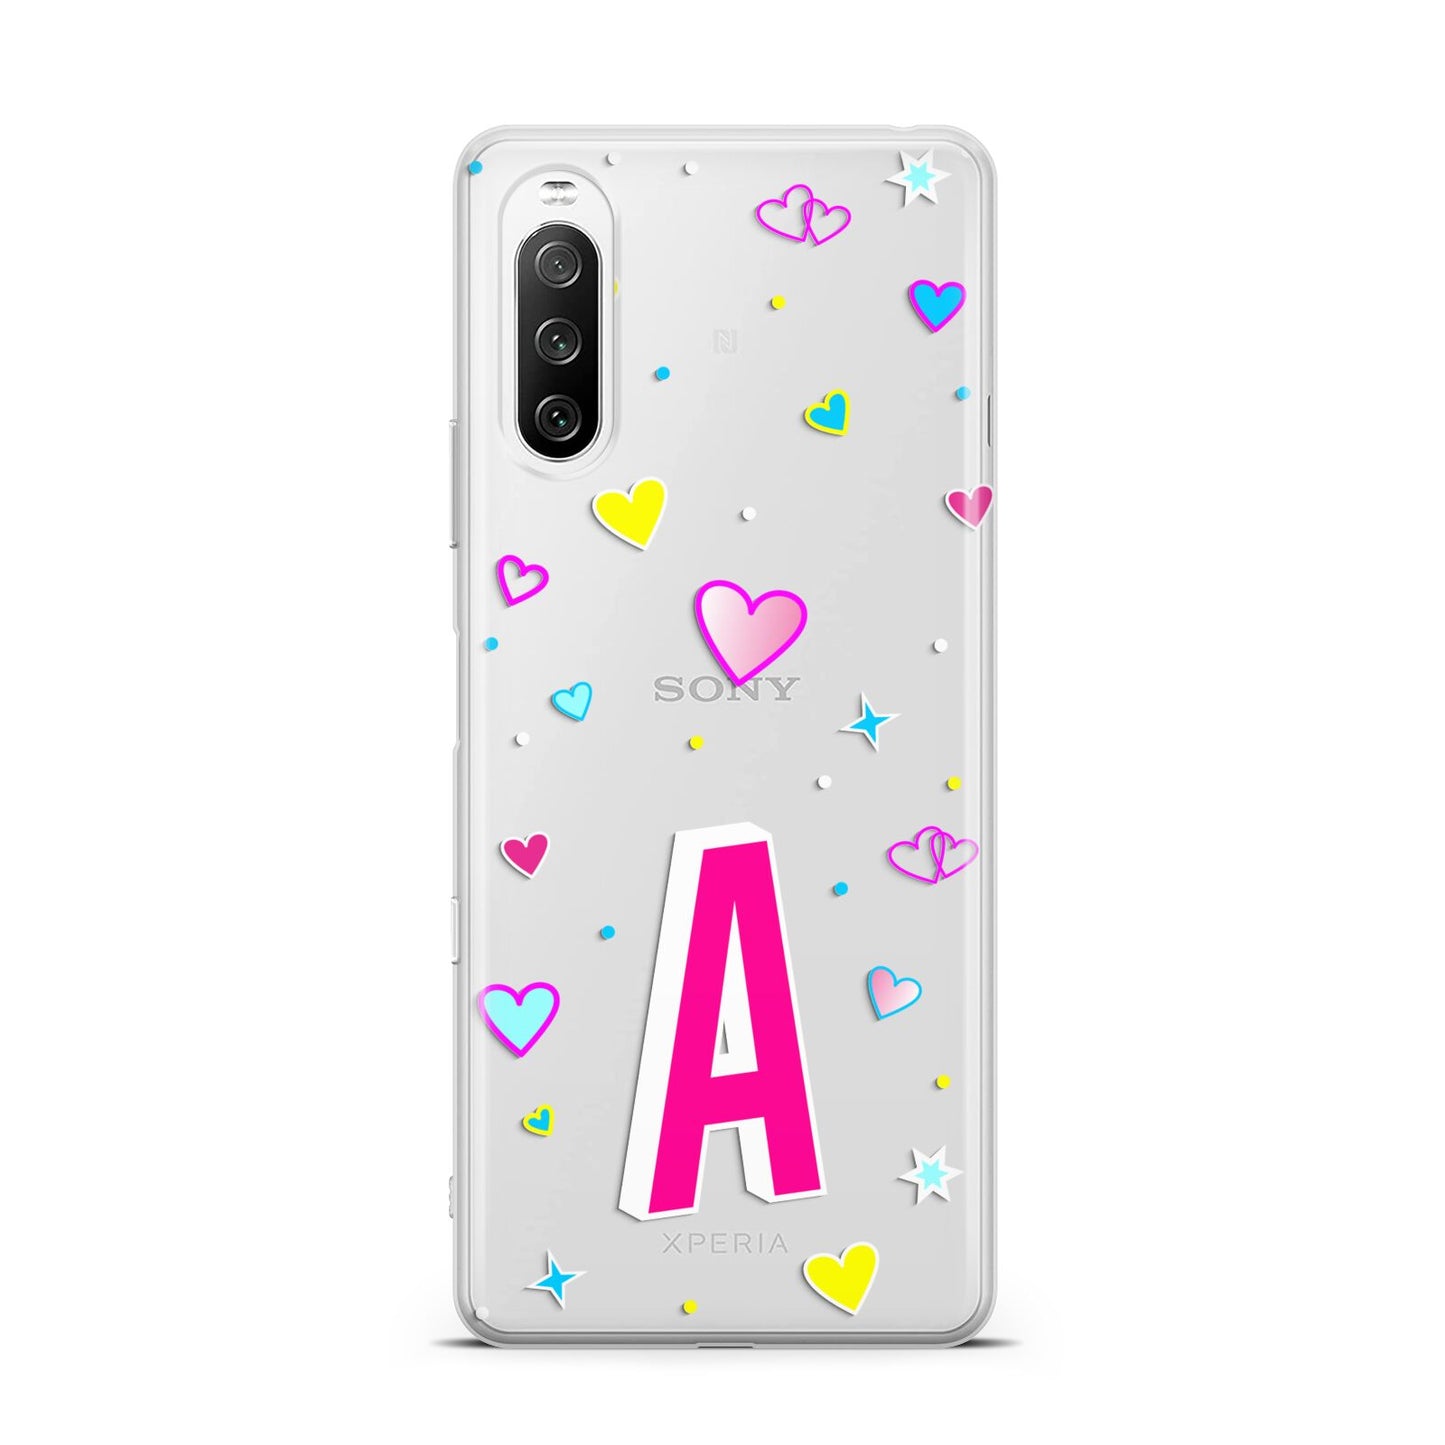 Personalised Heart Alphabet Clear Sony Xperia 10 III Case